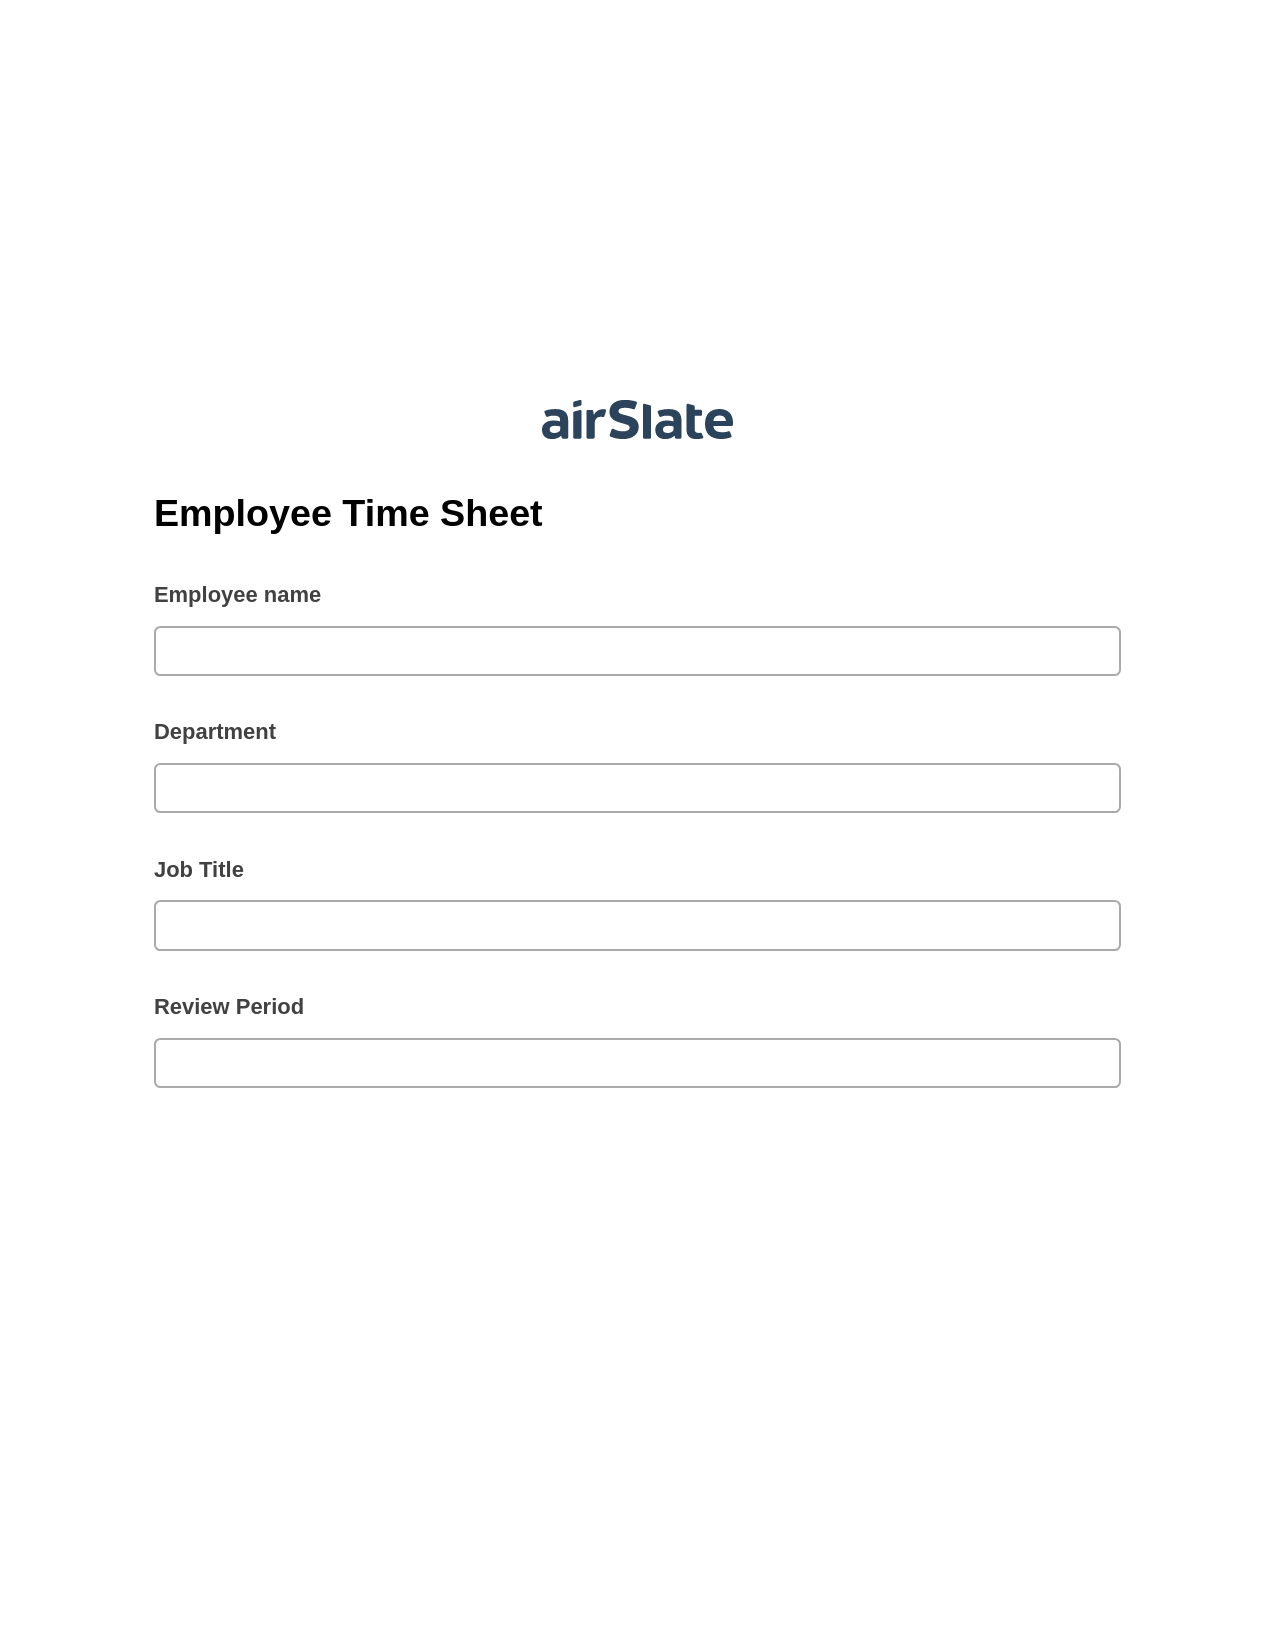 Employee Time Sheet Pre-fill from Salesforce Records with SOQL Bot, Update Audit Trail Bot, Archive to SharePoint Folder Bot